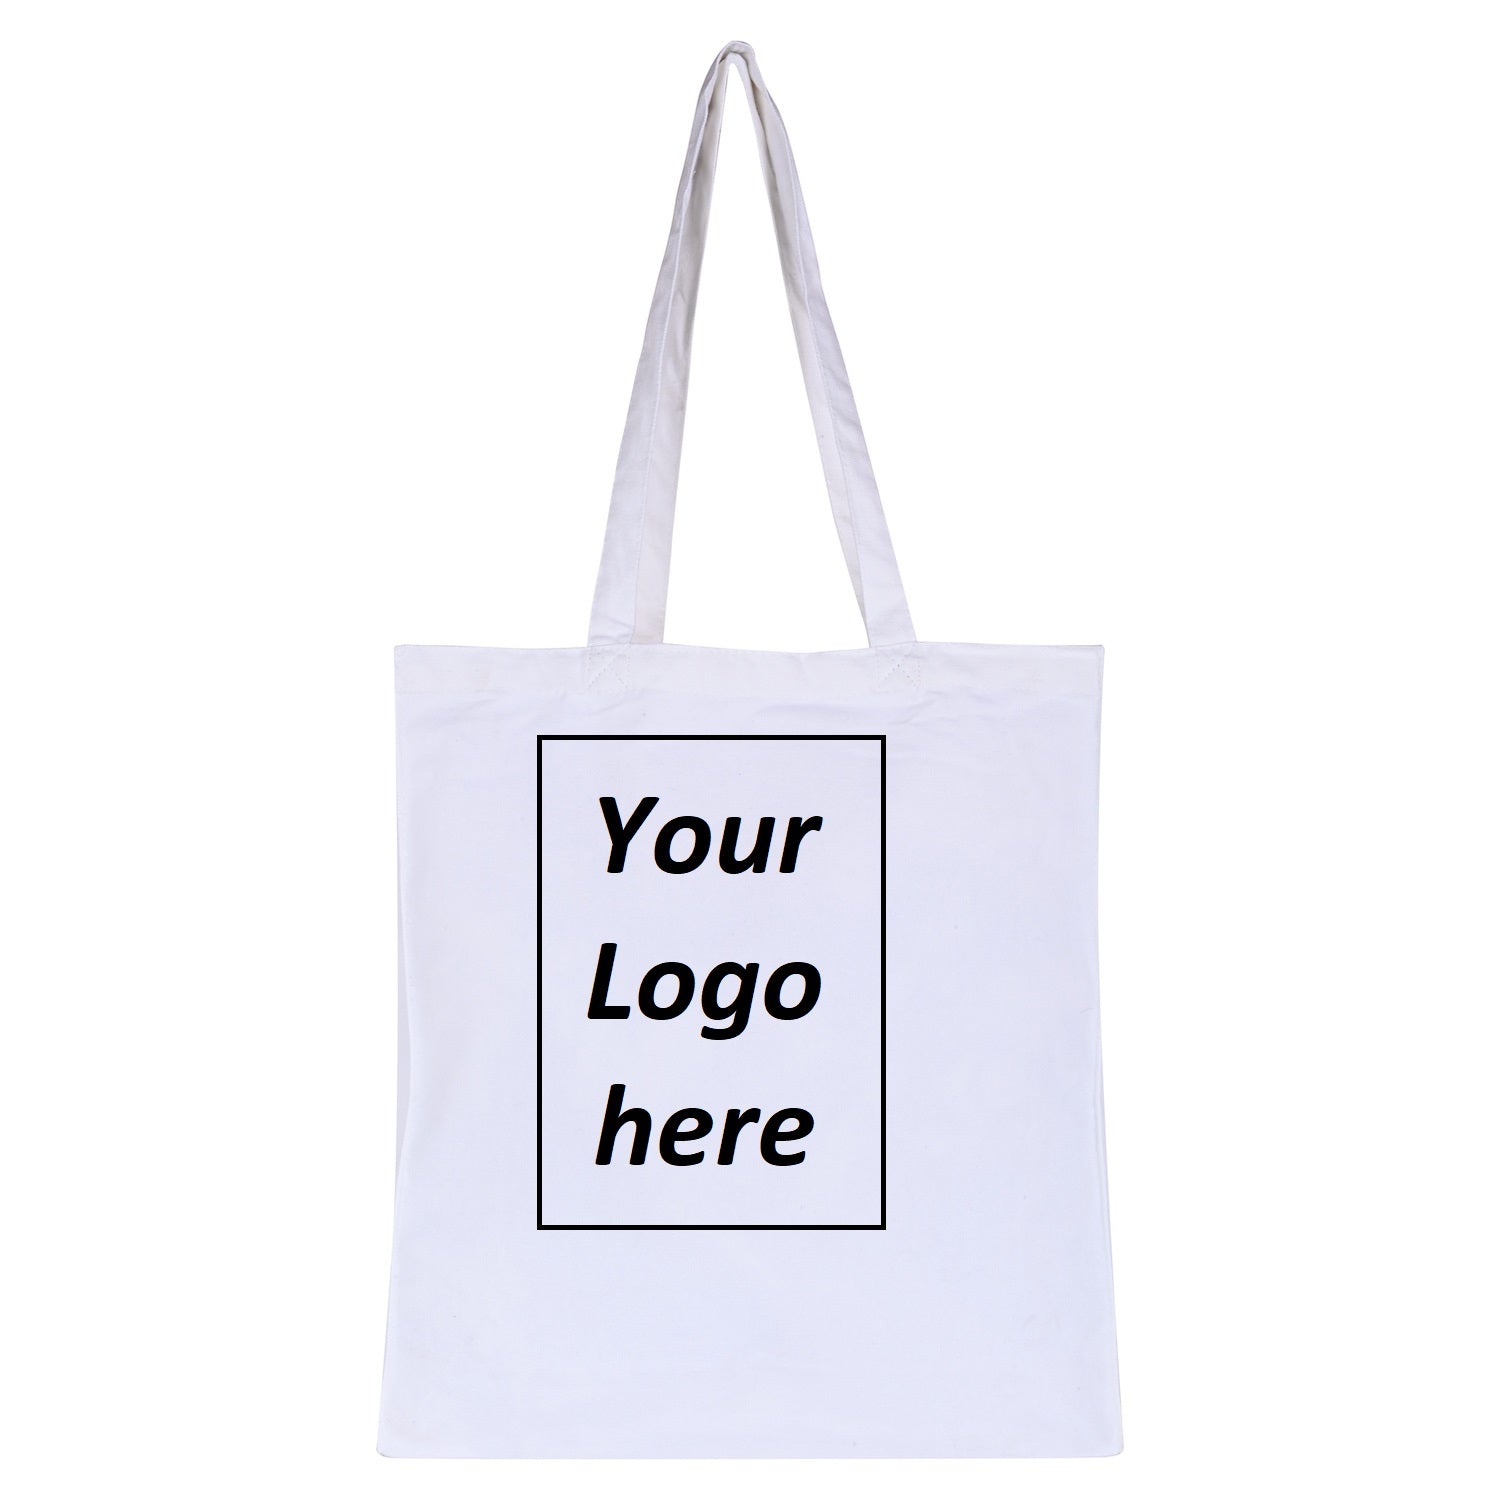 Why Tote Bags make great Corporate Gifts?